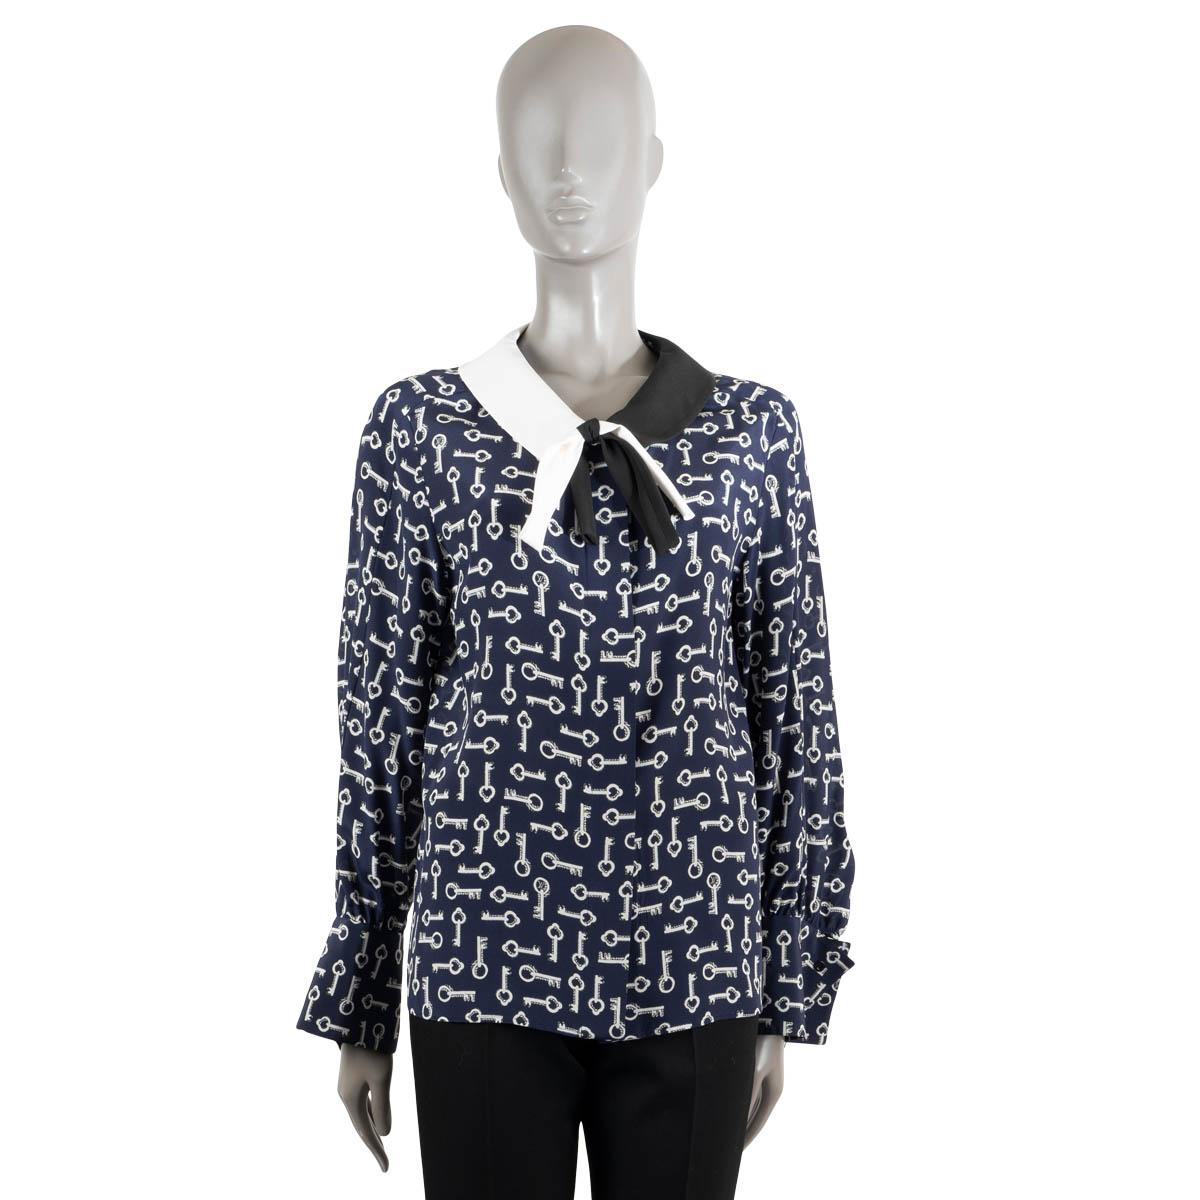 LOUIS VUITTON navy blue & white silk KEY PRINT Blouse Shirt 36 XS In Excellent Condition For Sale In Zürich, CH